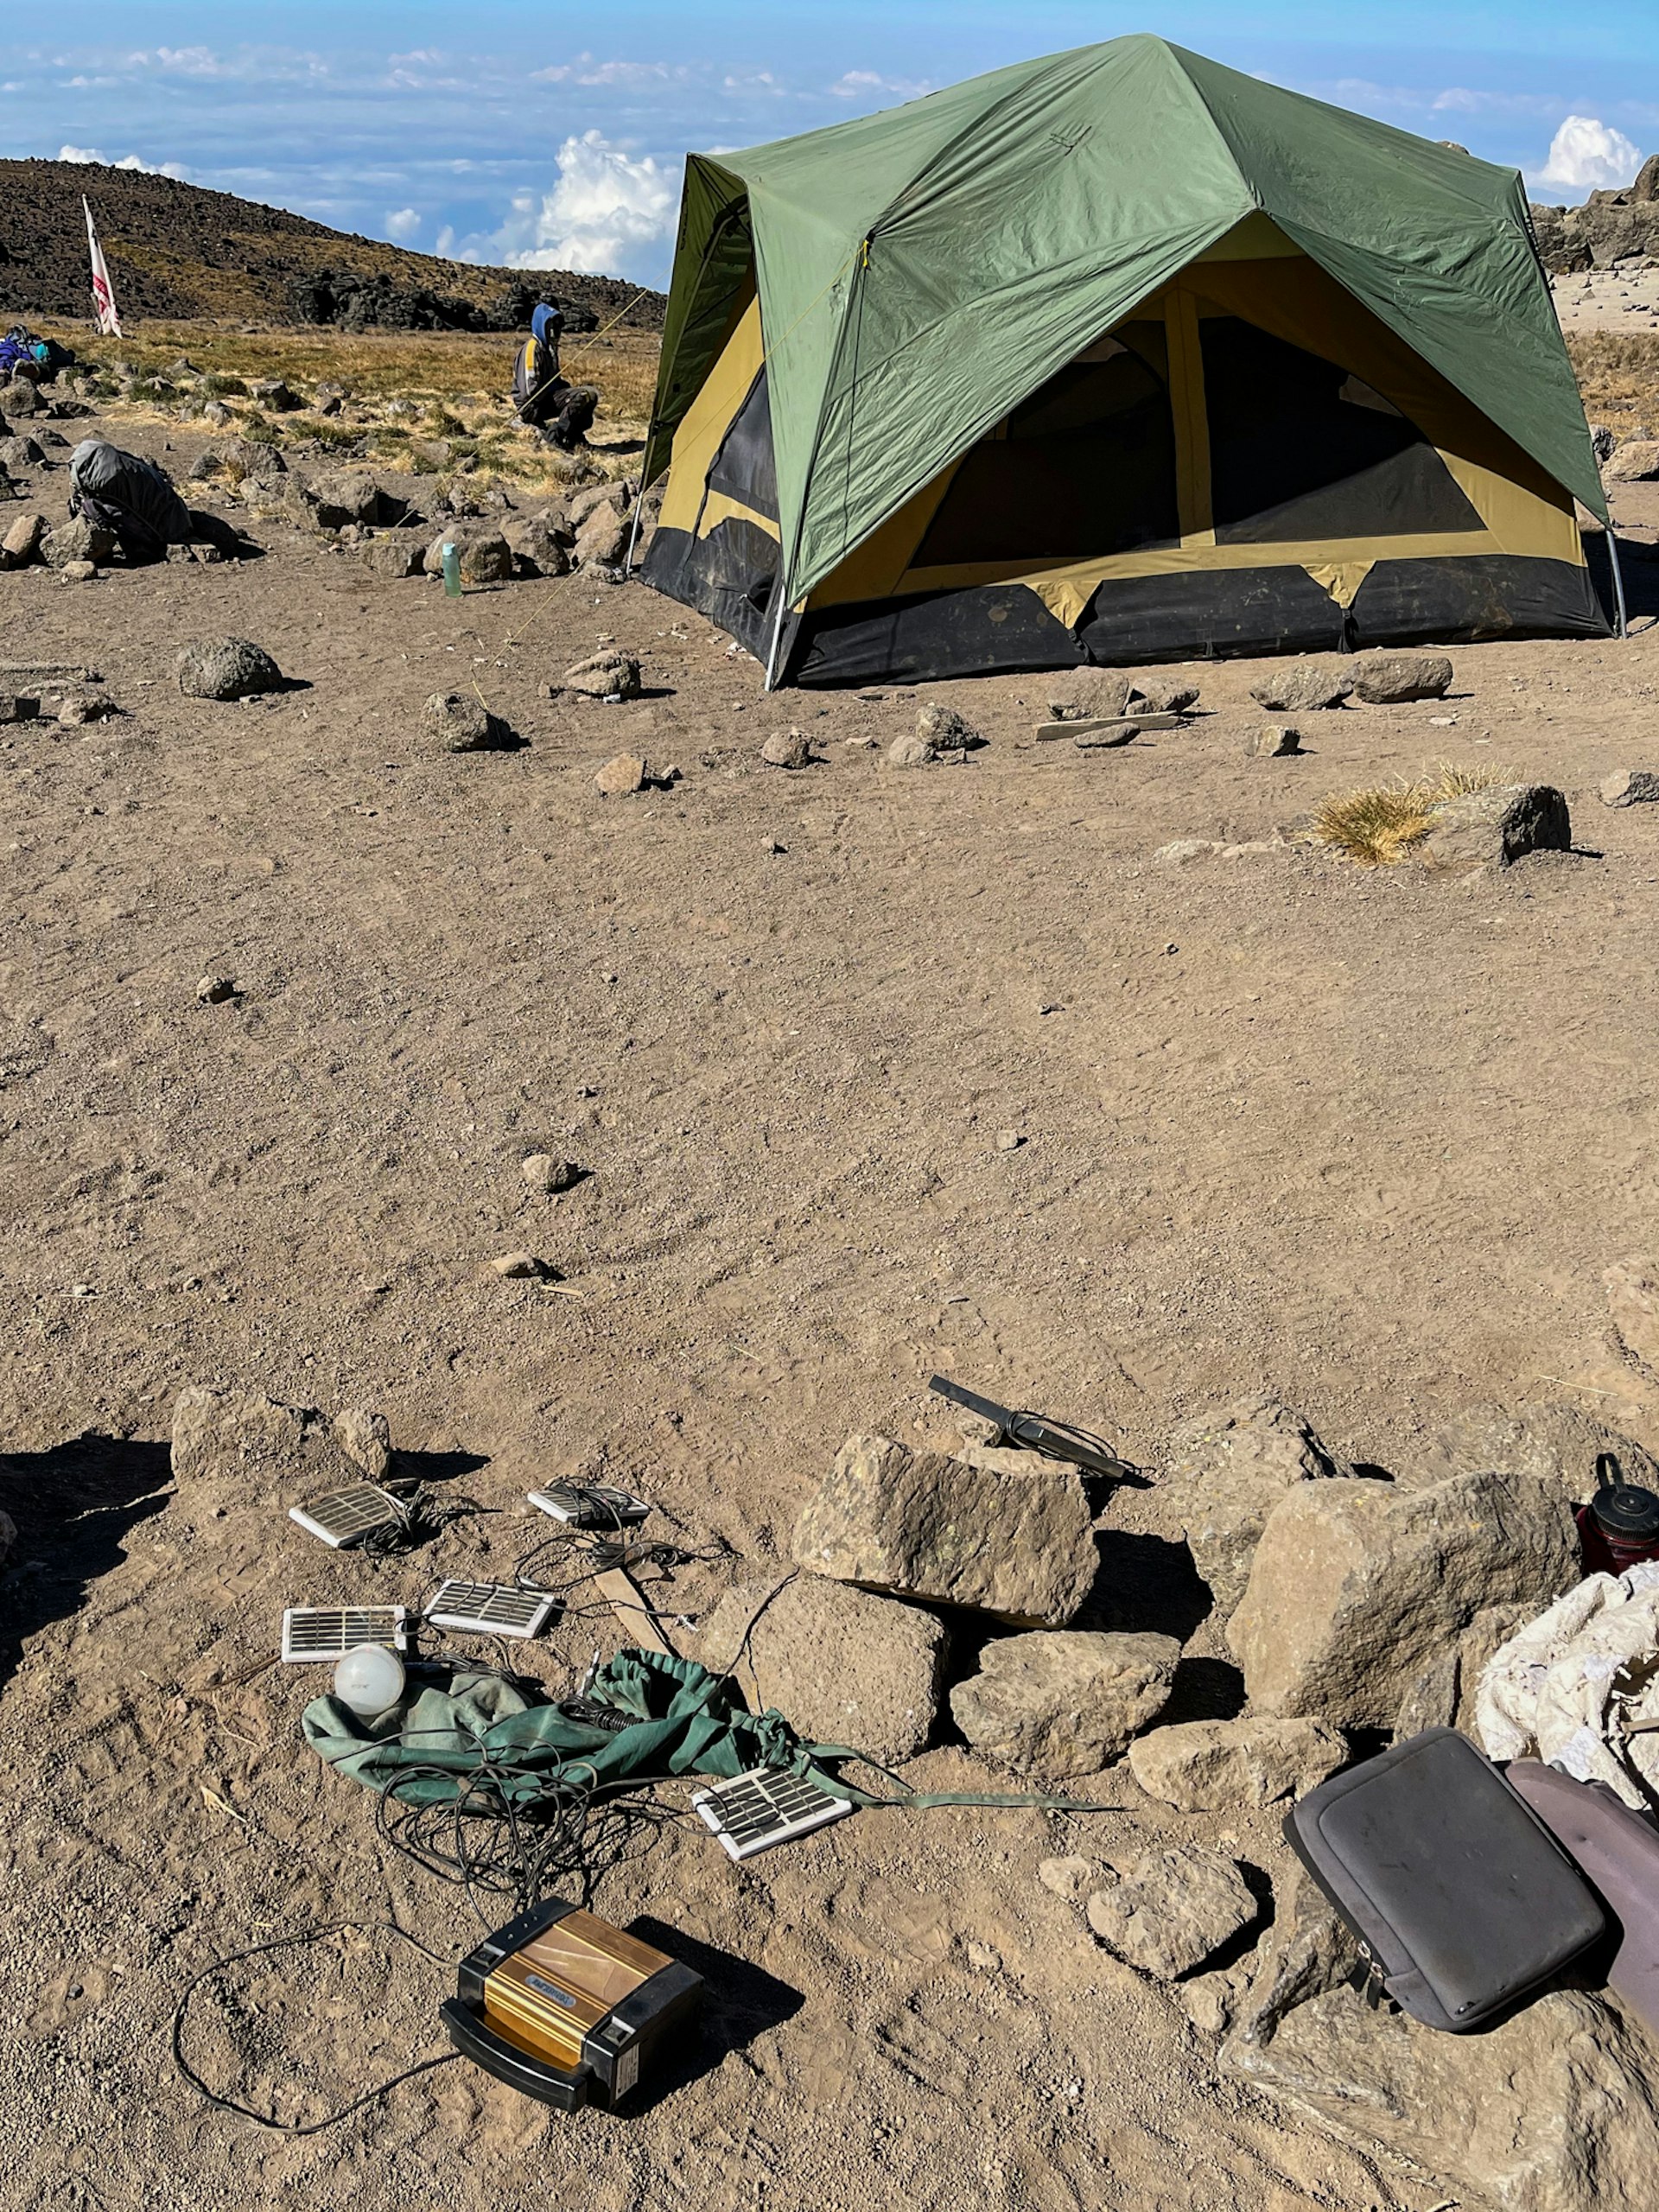 Using solar power to recharge along the way up Mt. Kilimanjaro